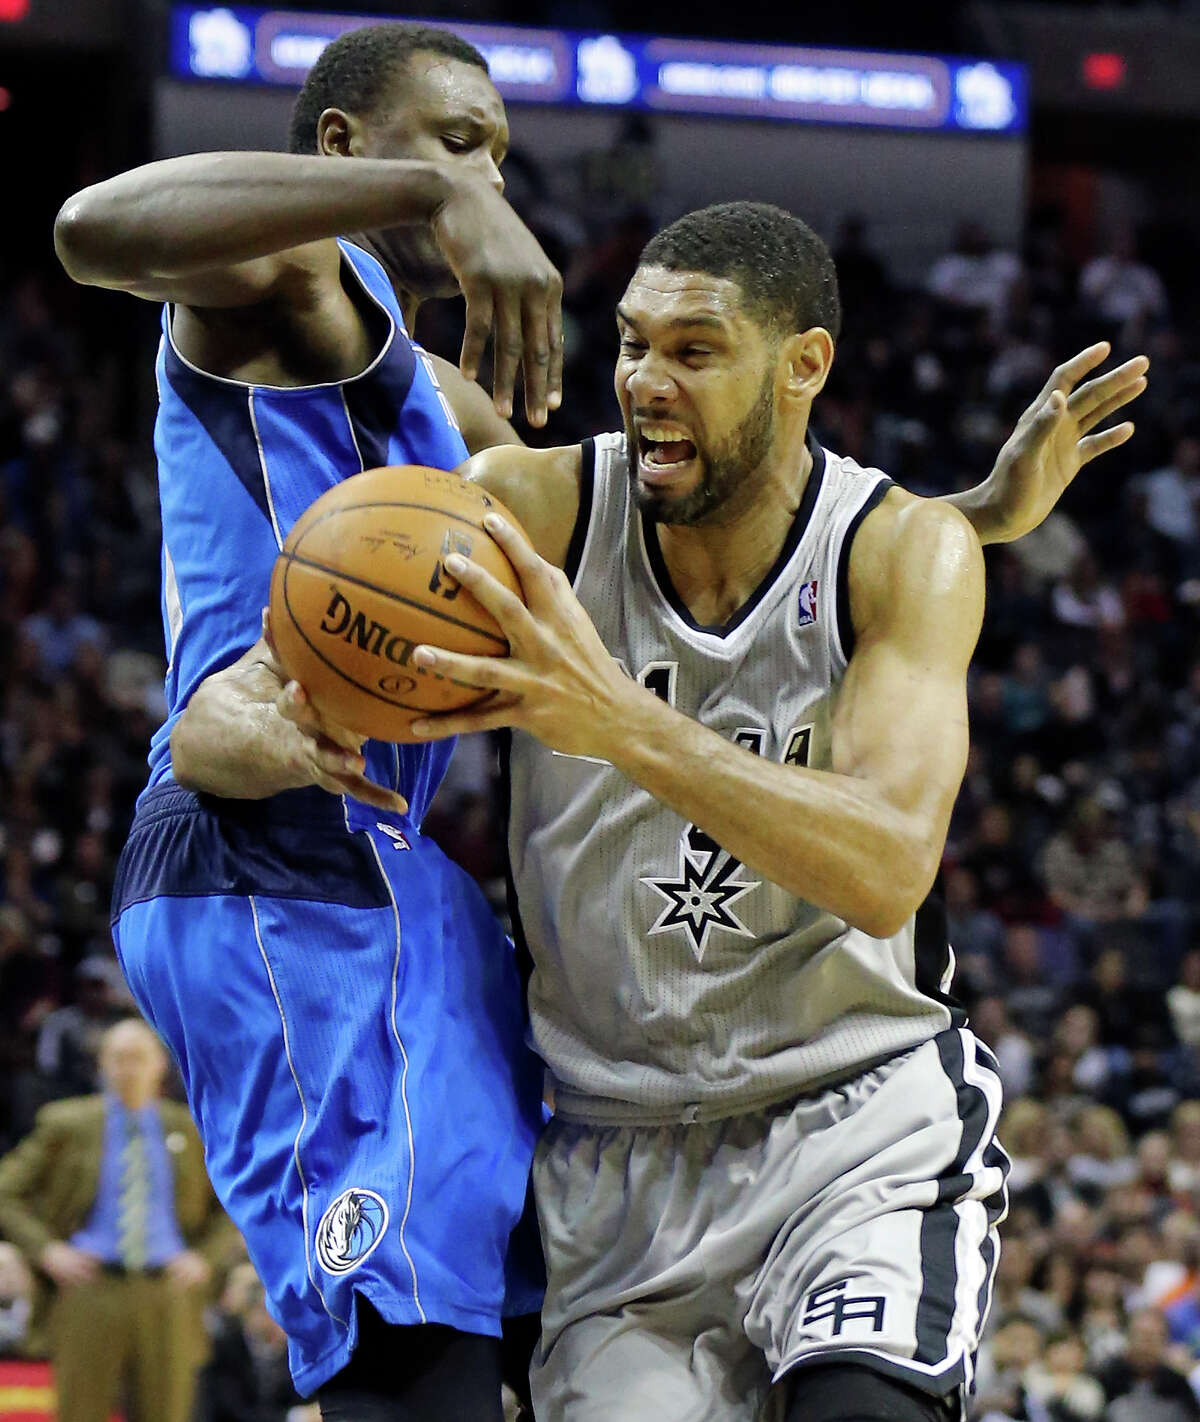 Tim Duncan had 17 points as the Spurs beat the Mavs for the eighth straight time.